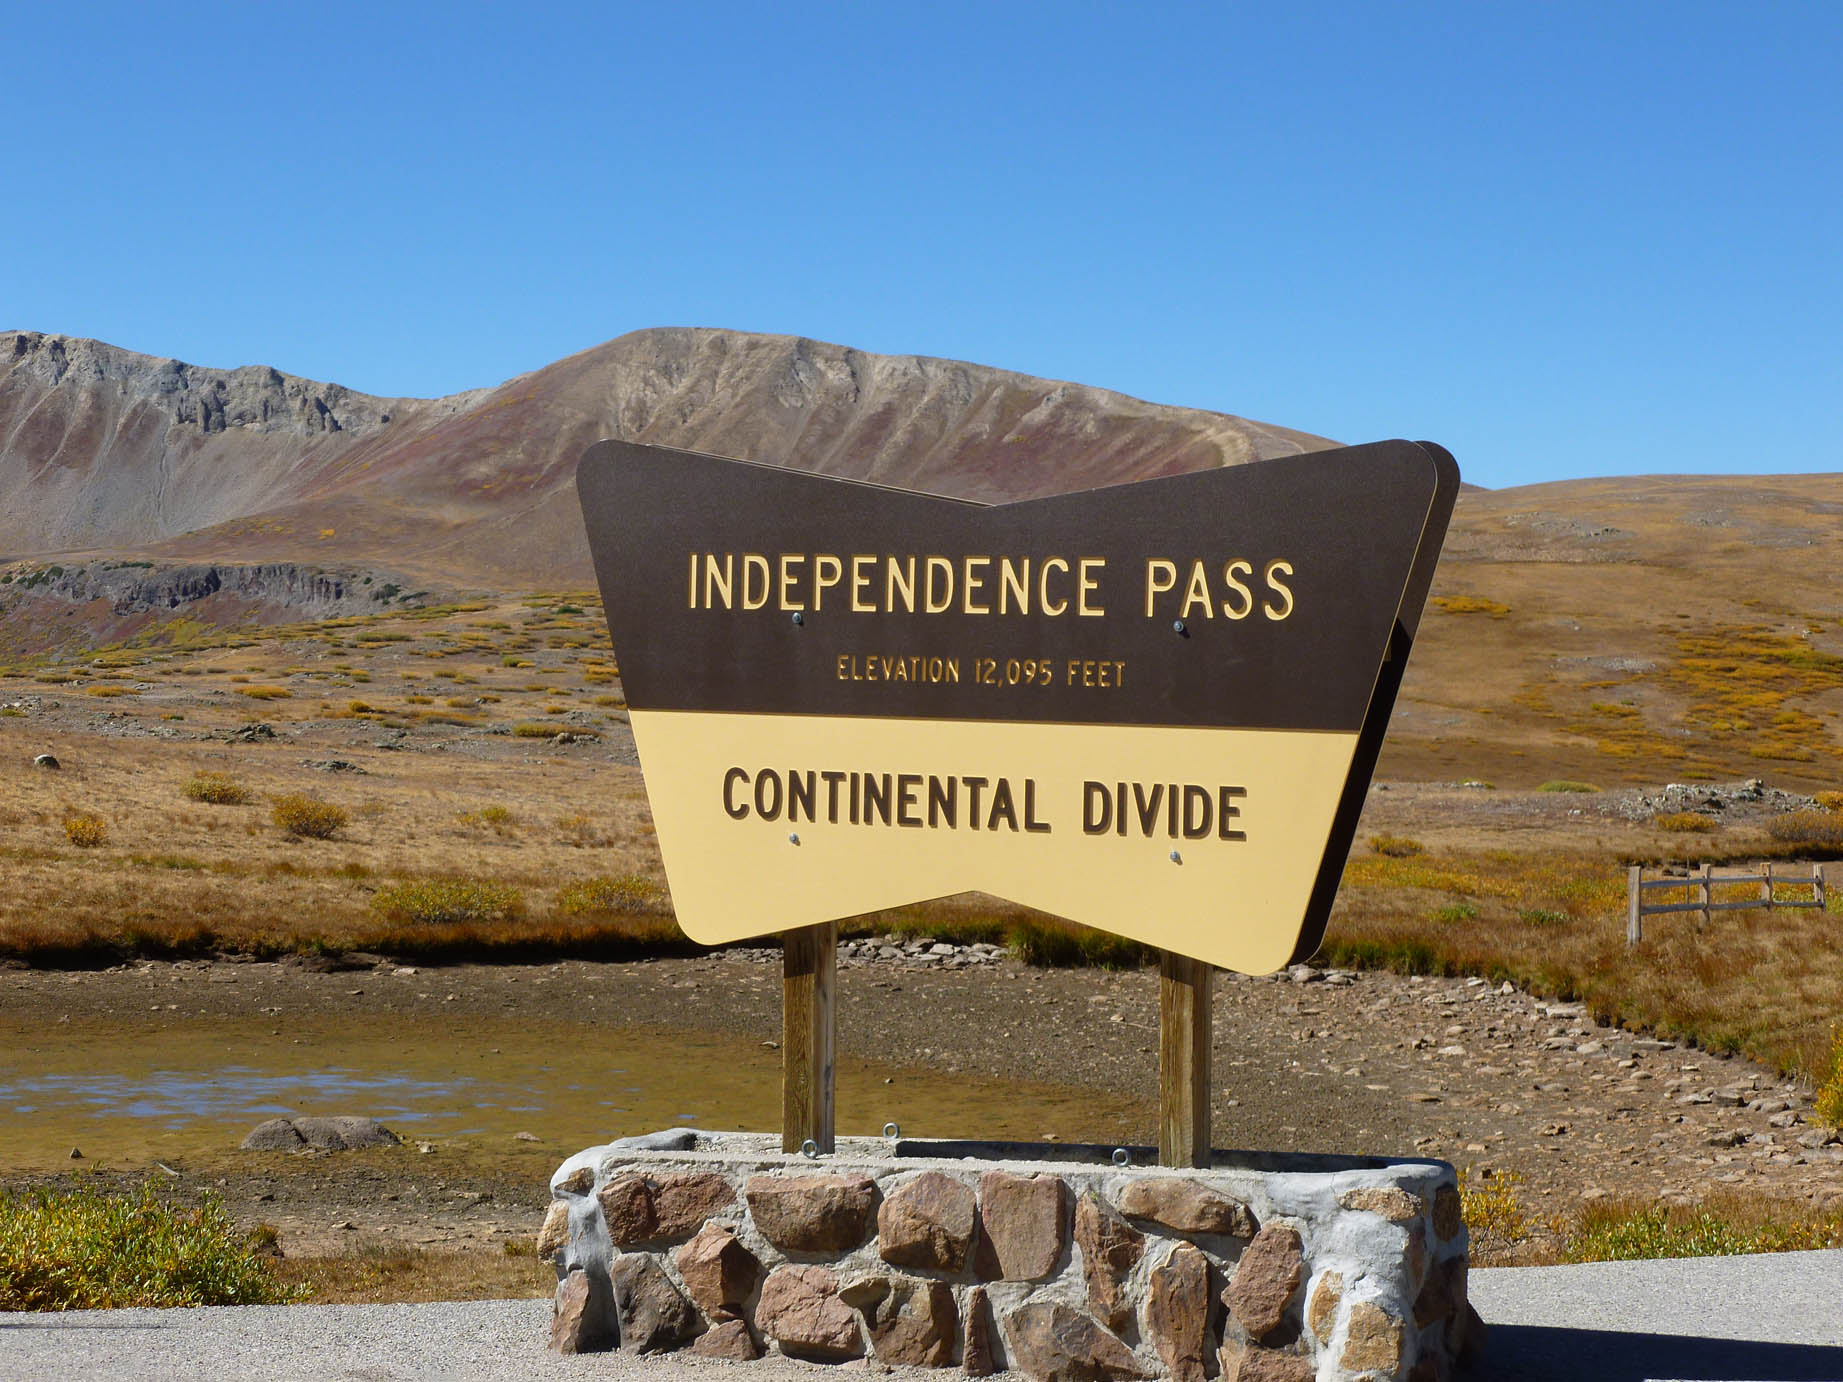 Independence Pass sign2120sf 9-14-18.JPG